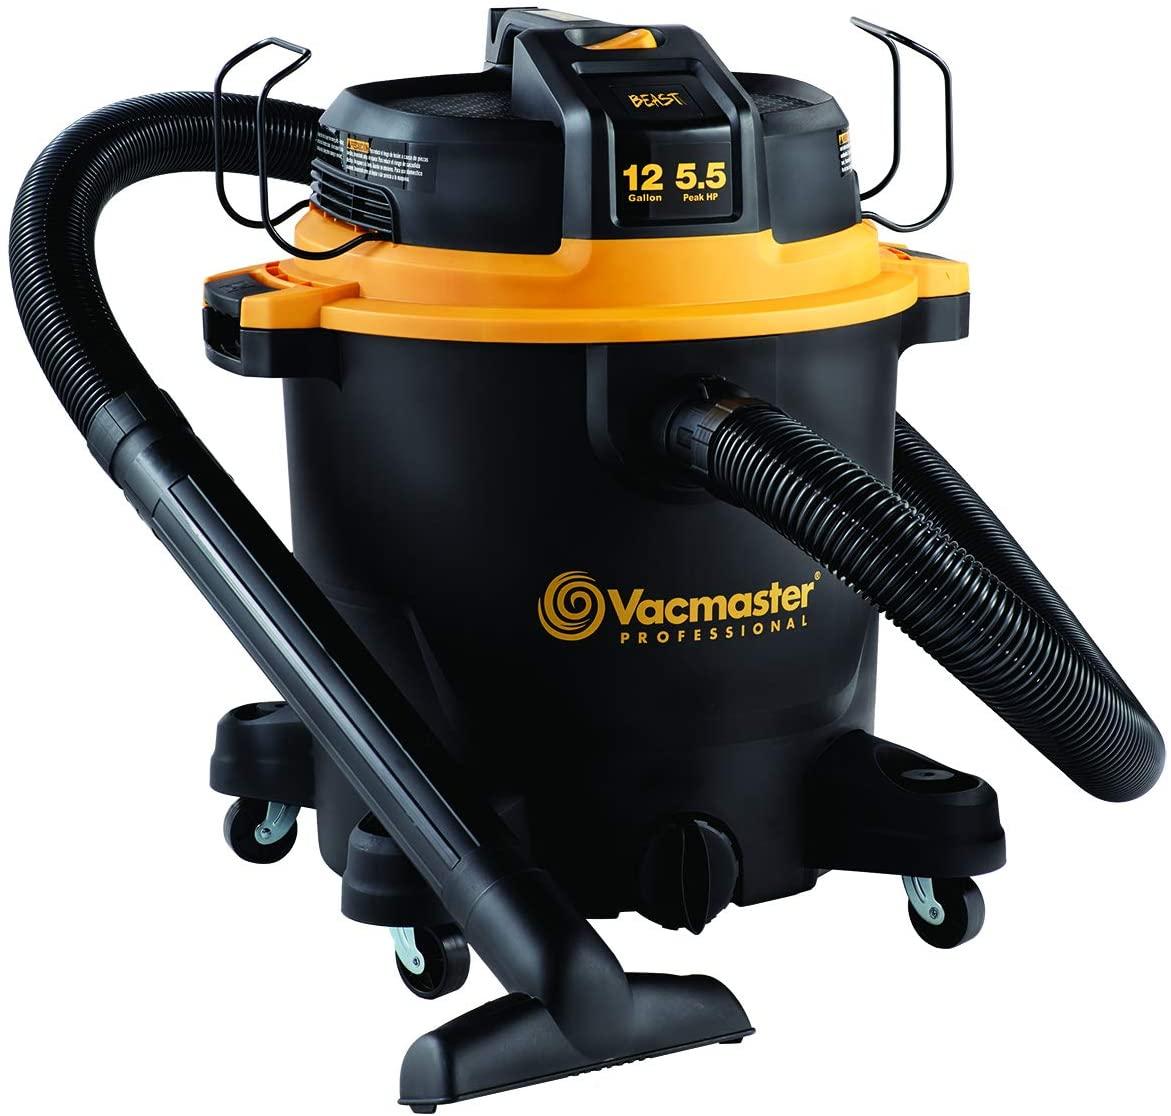 Vacmaster 5.5 HP Beast Series Professional Wet Dry Vacuum for $58.80 Shipped